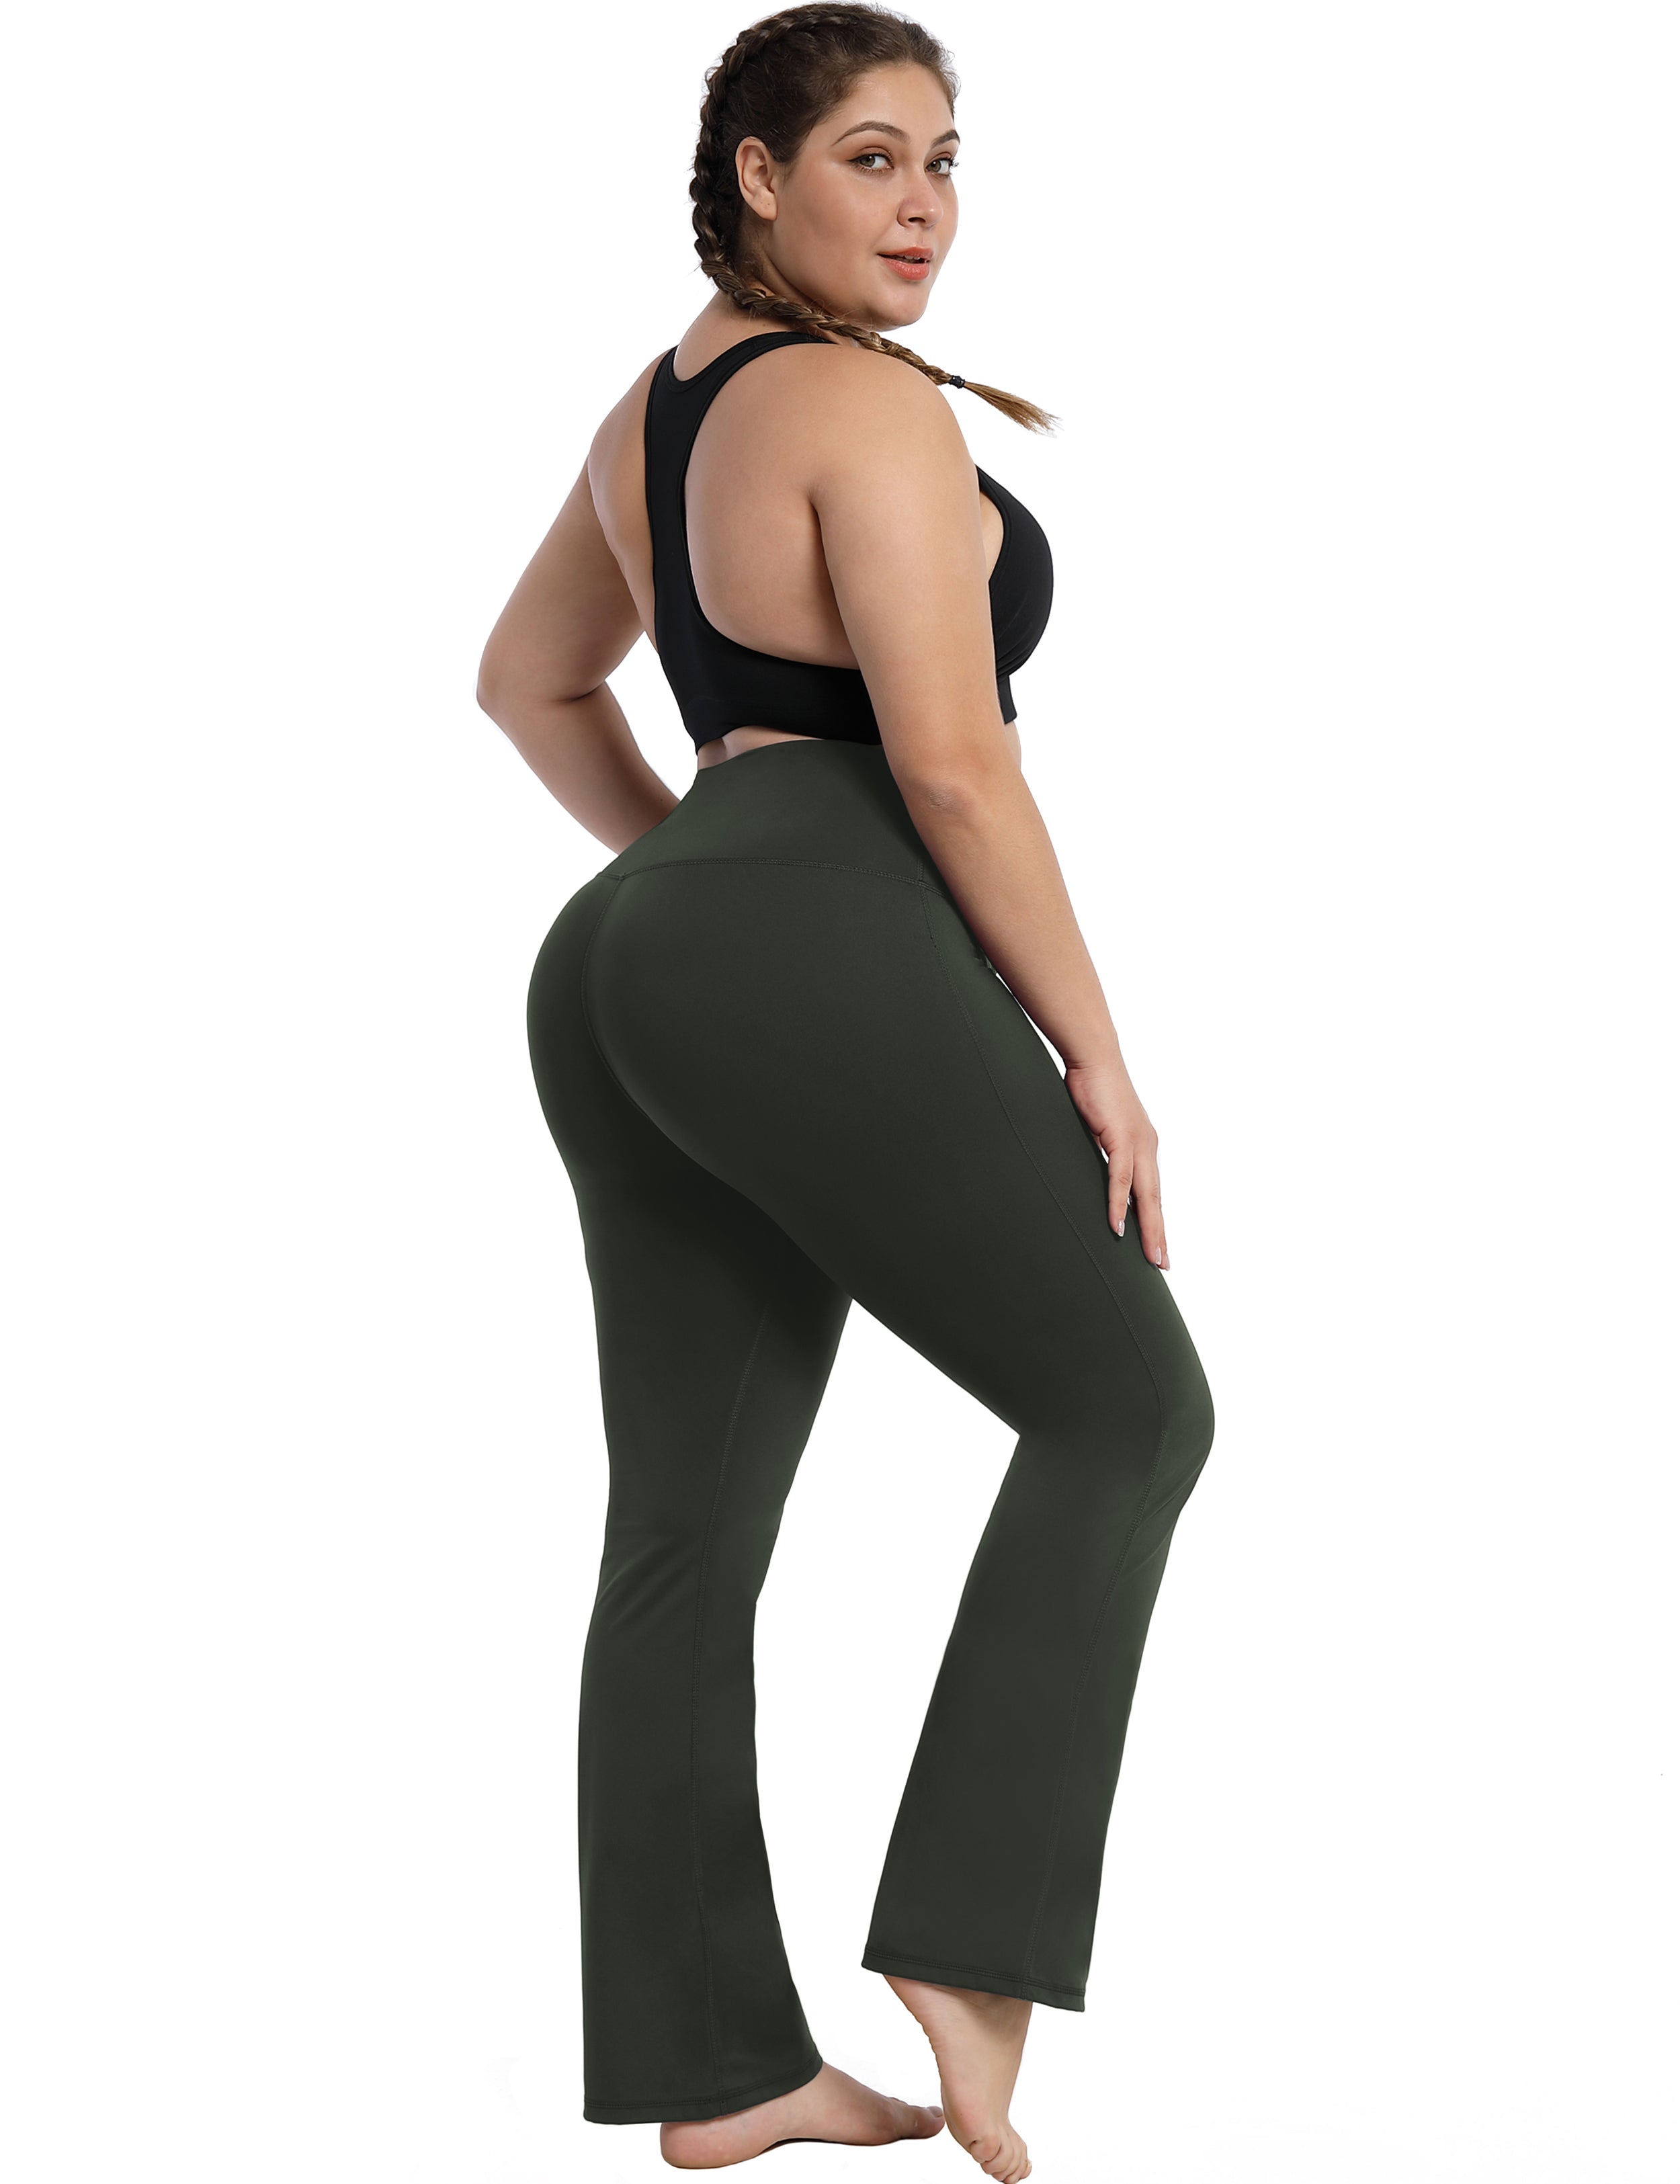 High Waist Bootcut Leggings Olivegray 75%Nylon/25%Spandex Fabric doesn't attract lint easily 4-way stretch No see-through Moisture-wicking Tummy control Inner pocket Five lengths